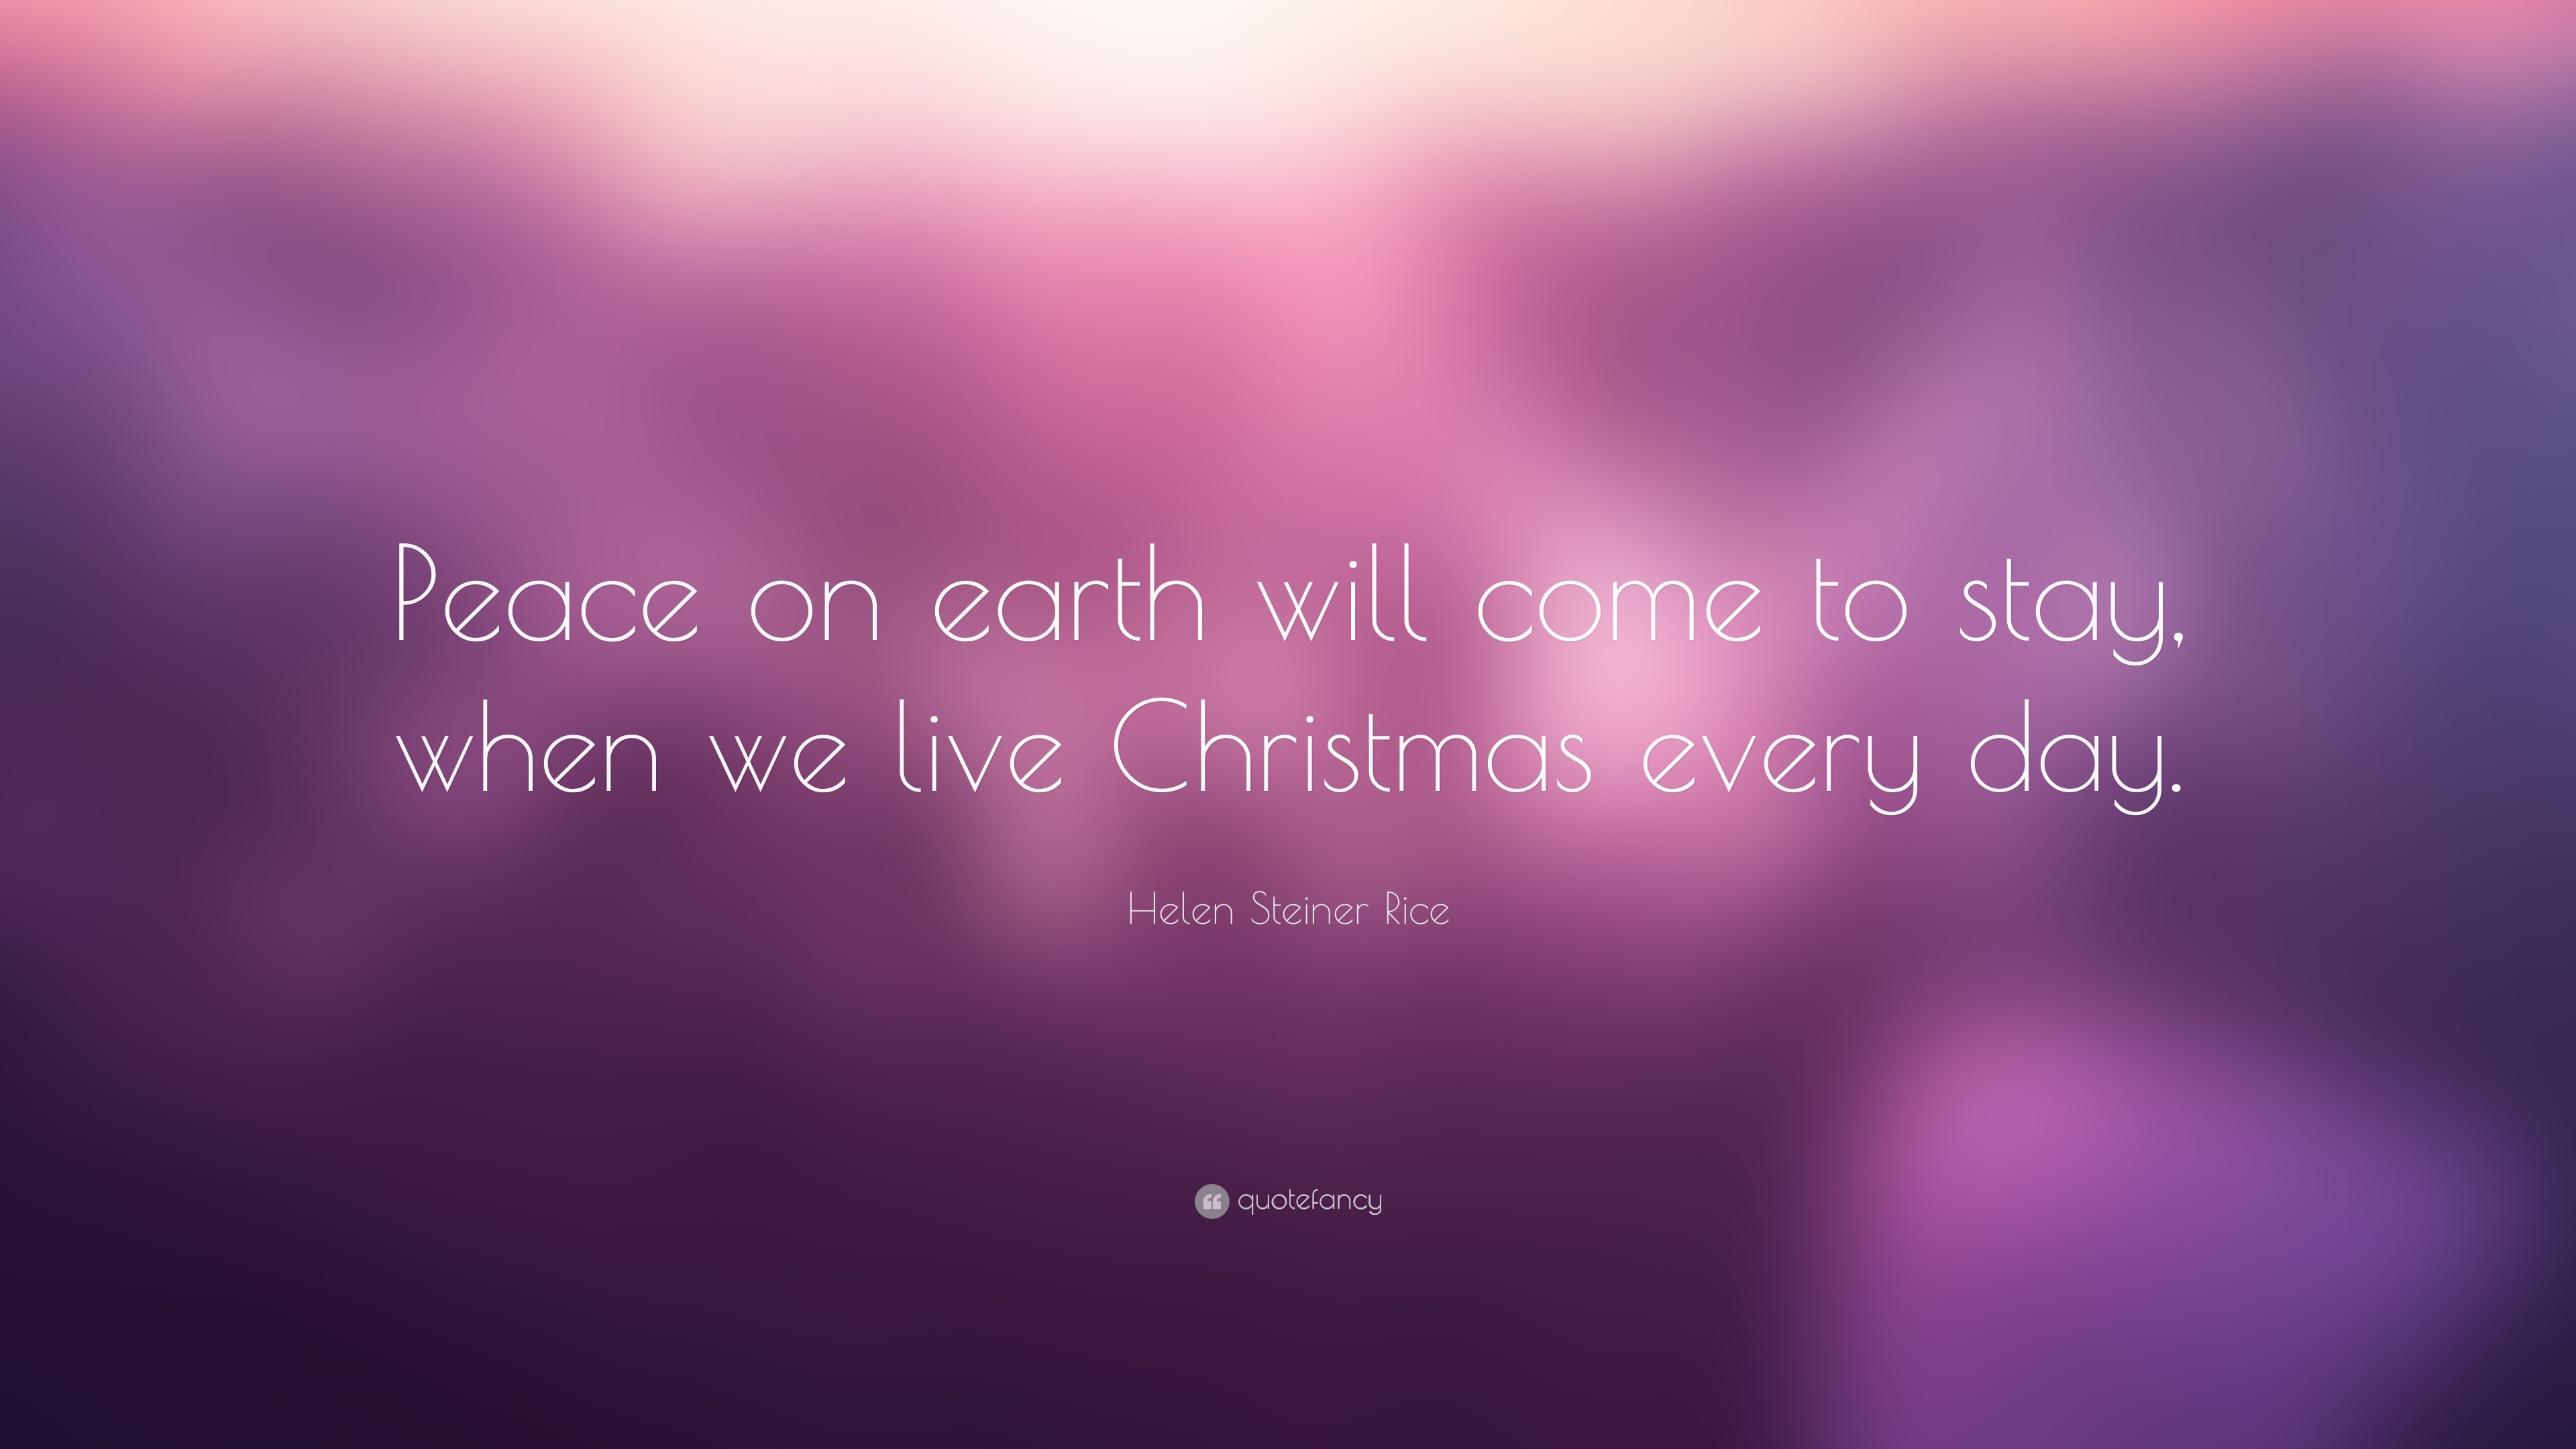 3840x2160 Christmas Quotes: “Peace on earth will come to stay, when we live Christmas